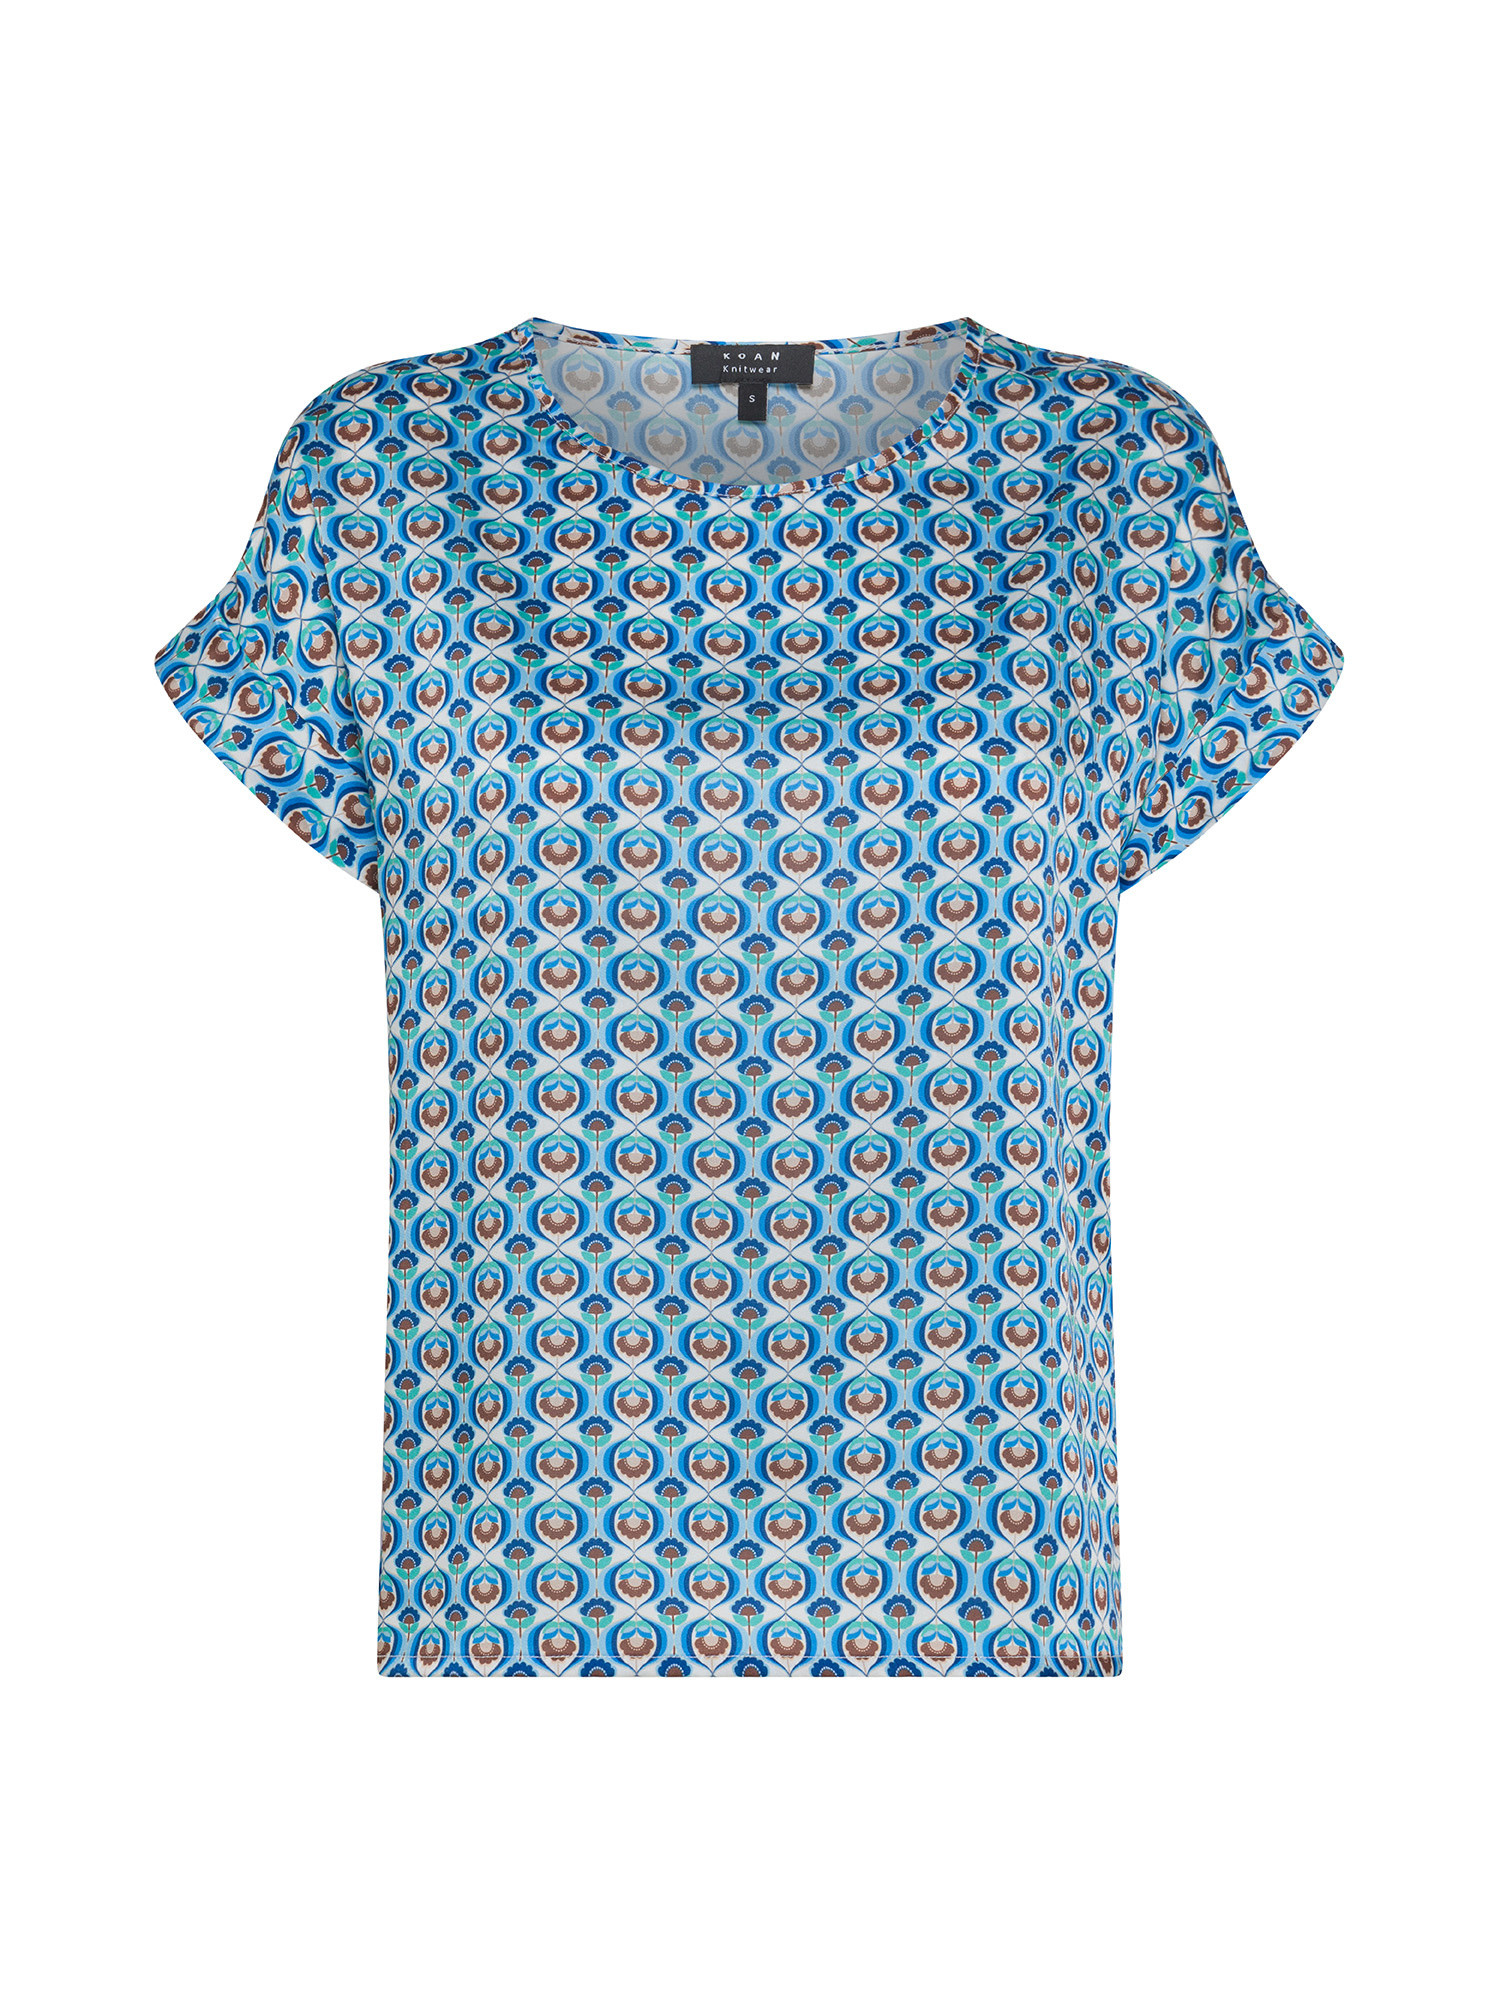 Koan - T-shirt with micro pattern, Light Blue, large image number 0